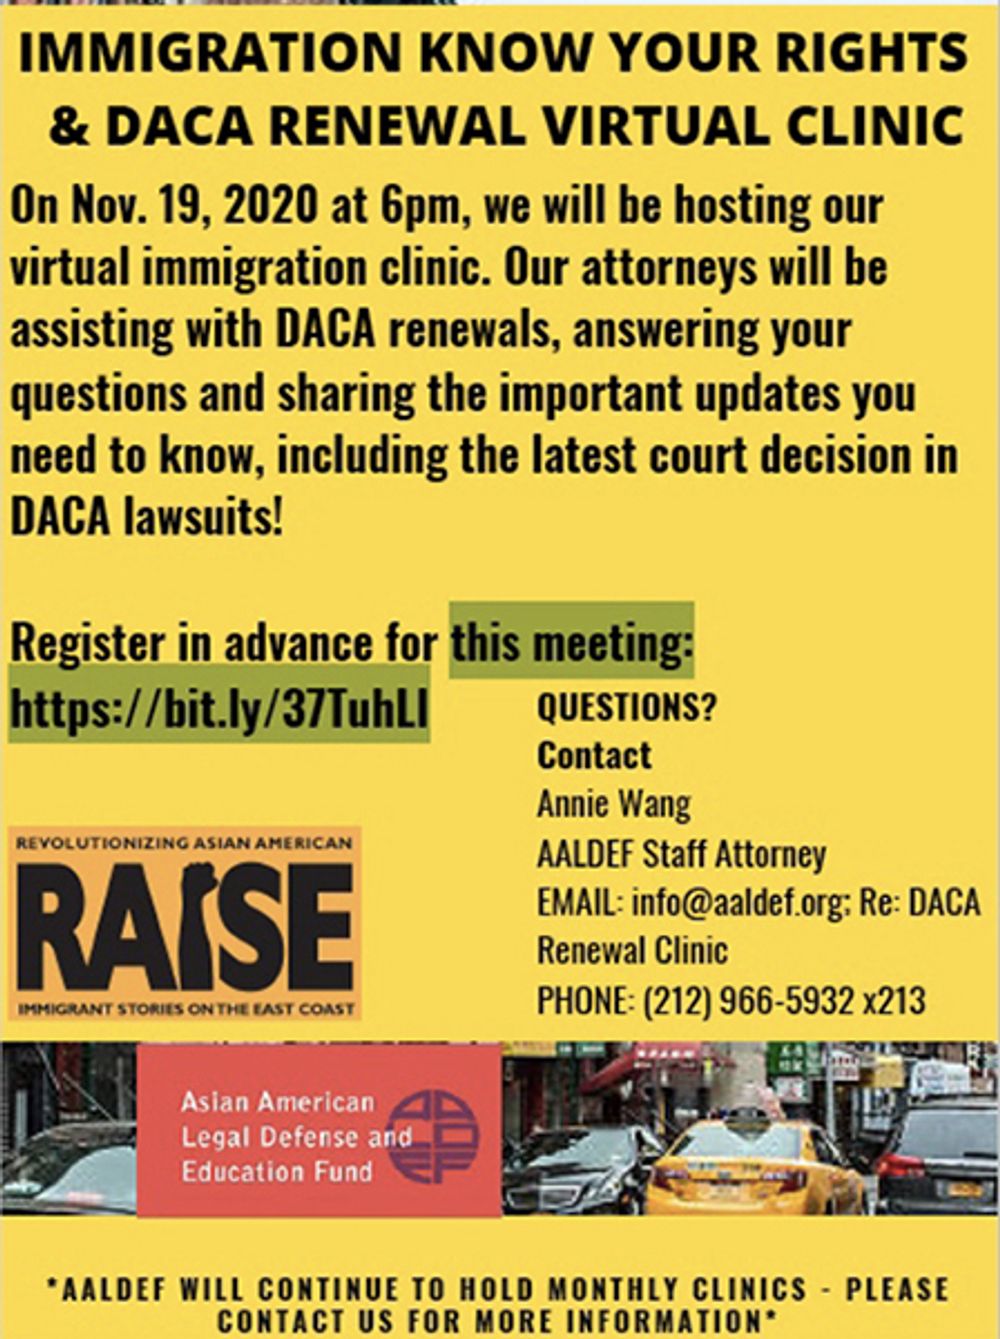 Image for Nov. 19 - AALDEF immigration/DACA renewal clinic